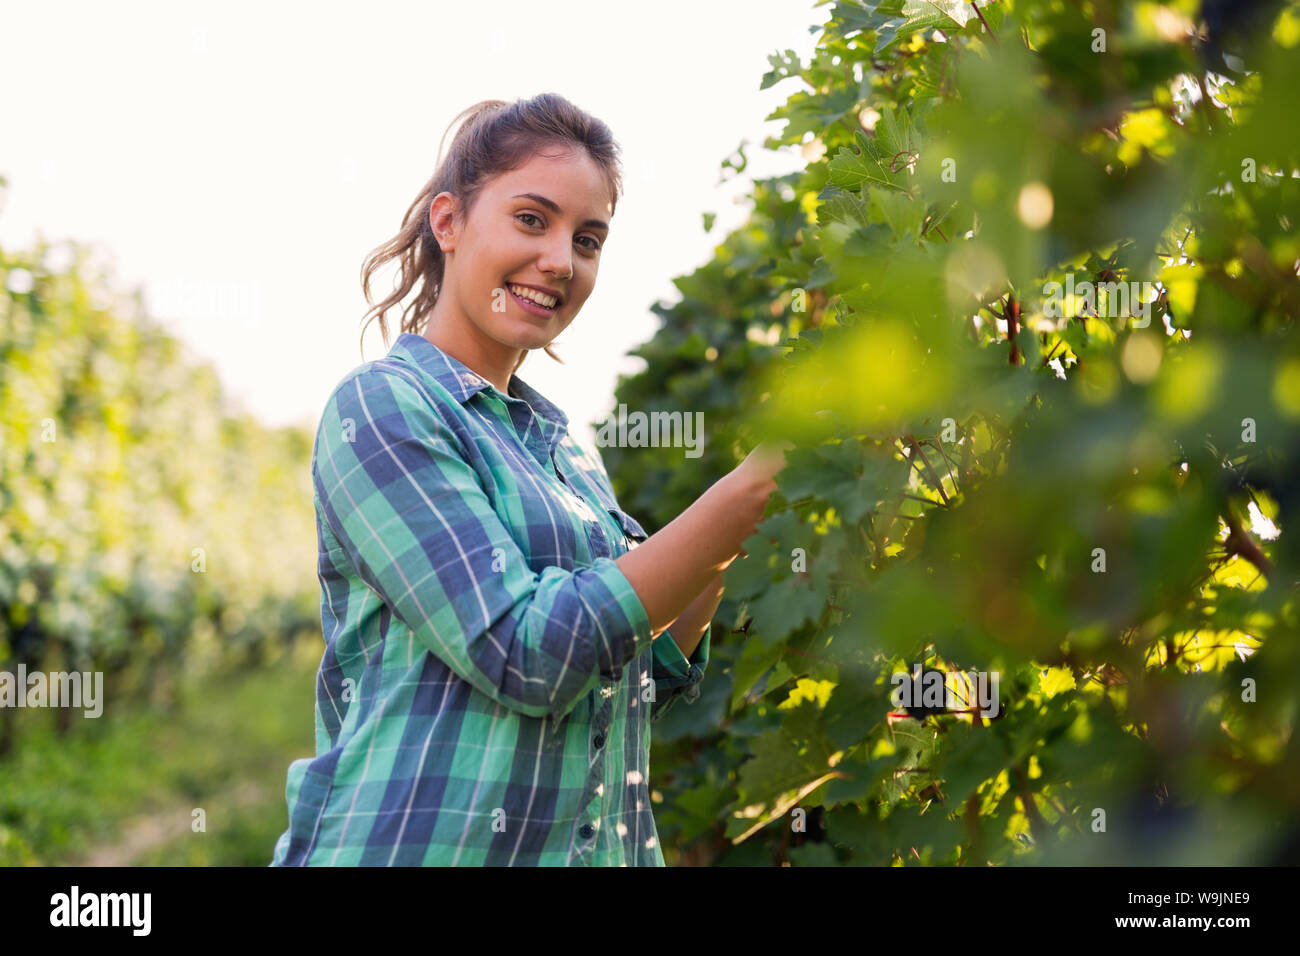 Portrait of young woman working in vineyard Stock Photo